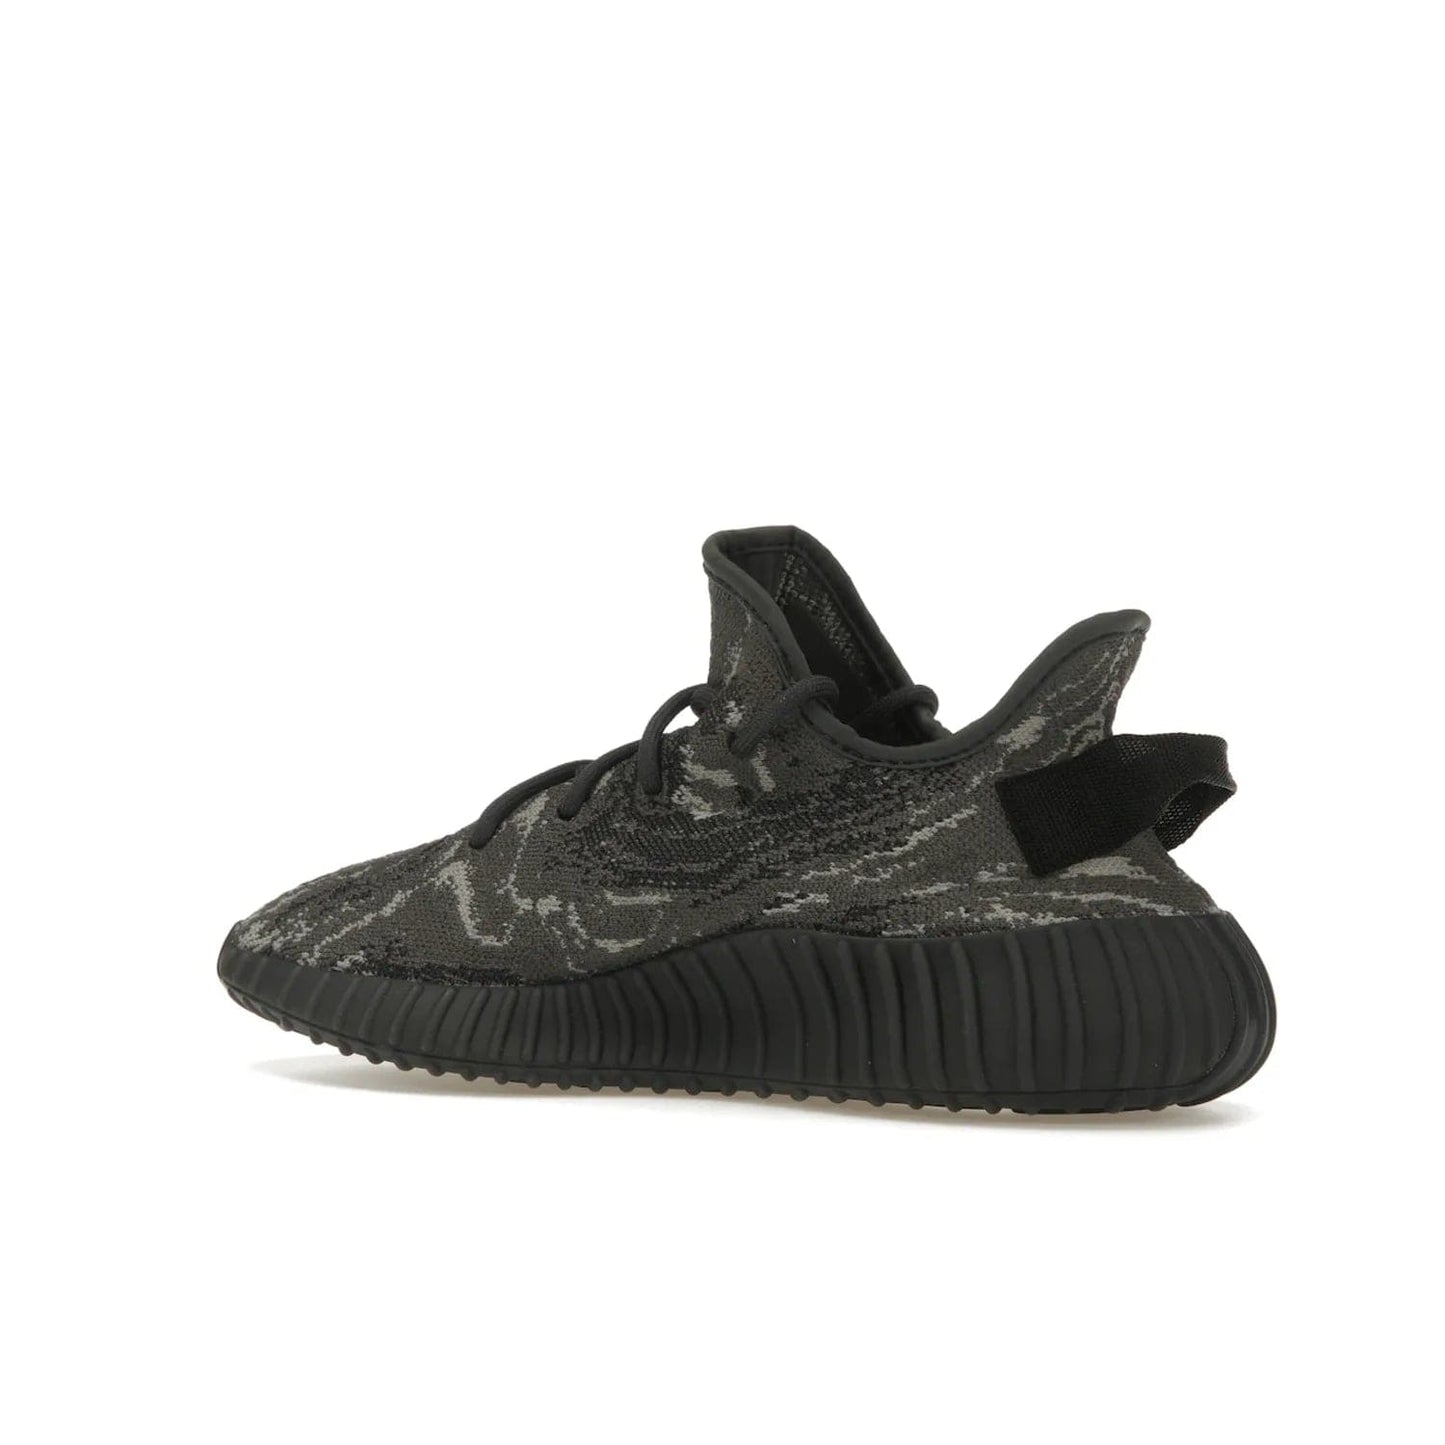 adidas Yeezy Boost 350 V2 MX Dark Salt - Image 22 - Only at www.BallersClubKickz.com - ##
The adidas Yeezy Boost 350 V2 MX Dark Salt offers a contemporary look with a signature combination of grey and black hues. Cushioned Boost midsole and side stripe allow for all day wear. Get the perfect fashion-forward addition with this sleek sneaker for $230.